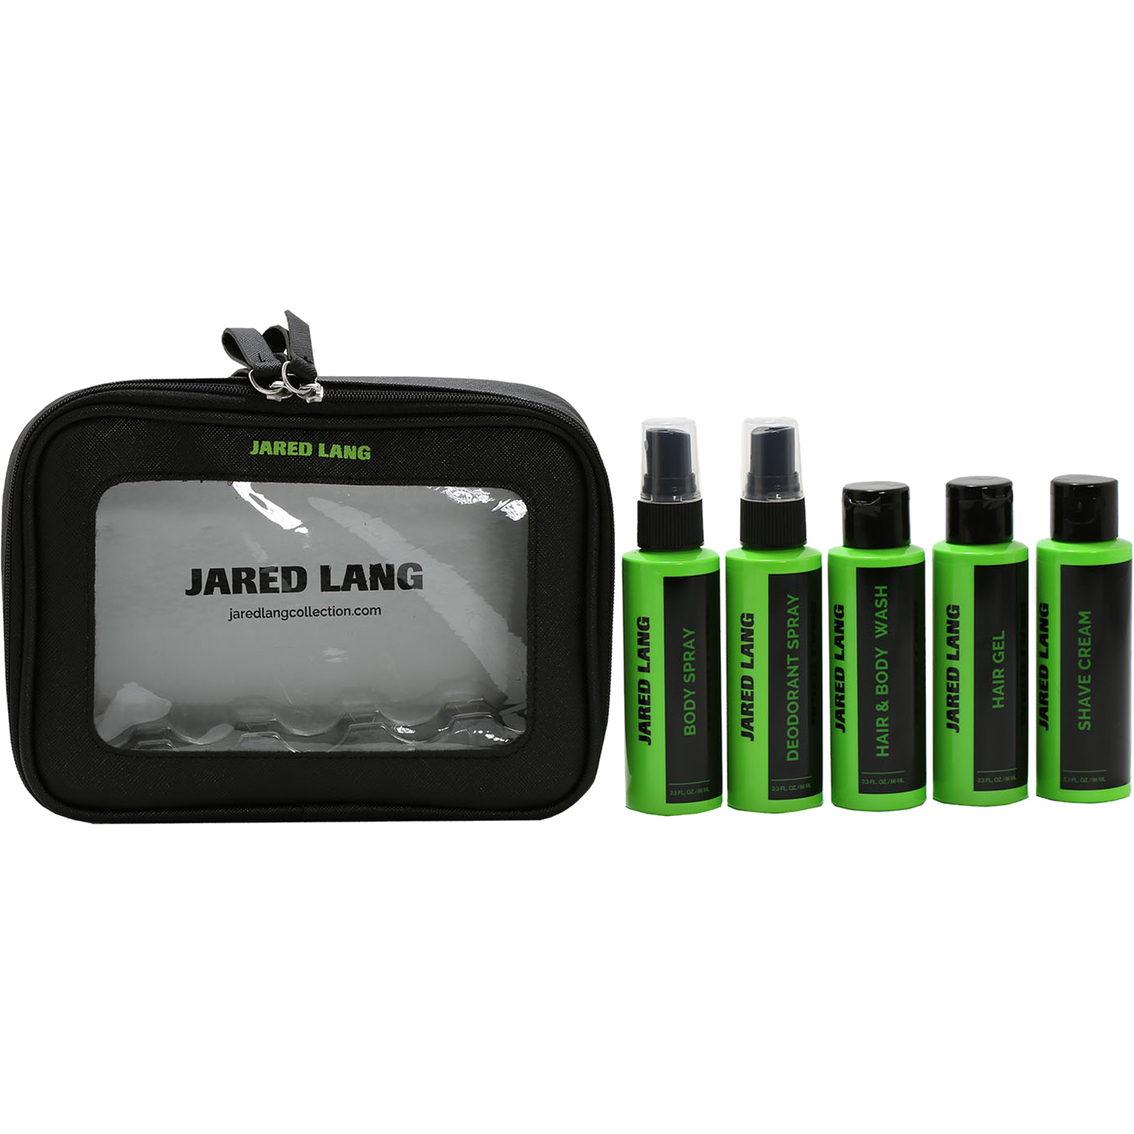 Picture of Jared Lang 22065791 Jared Lang H&Bw Signature Fragrance Gift Set - 5 Piece